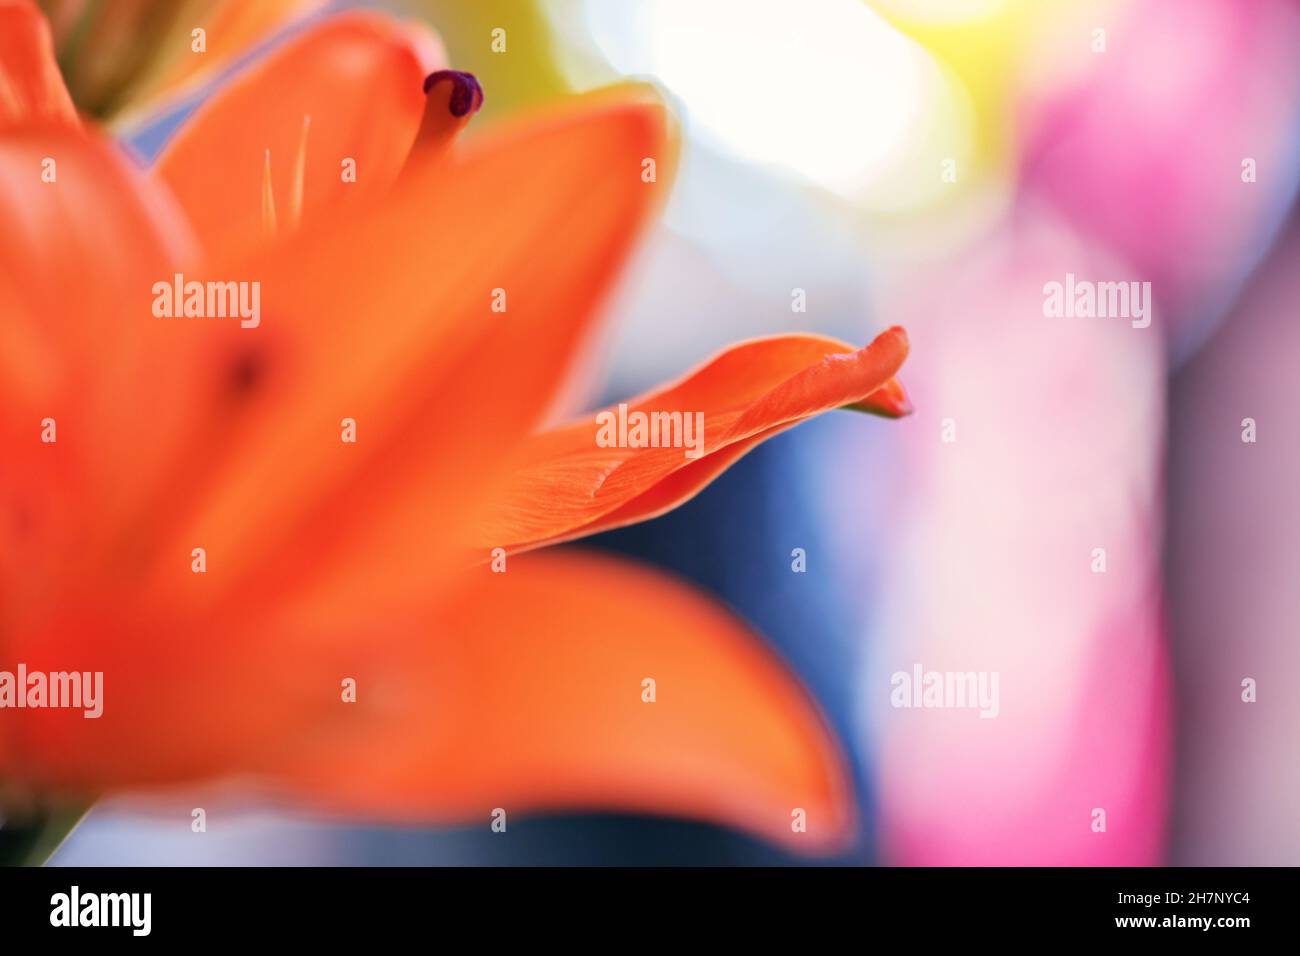 Charming orange flower on background of multi-colored abstraction for crew ideas Stock Photo